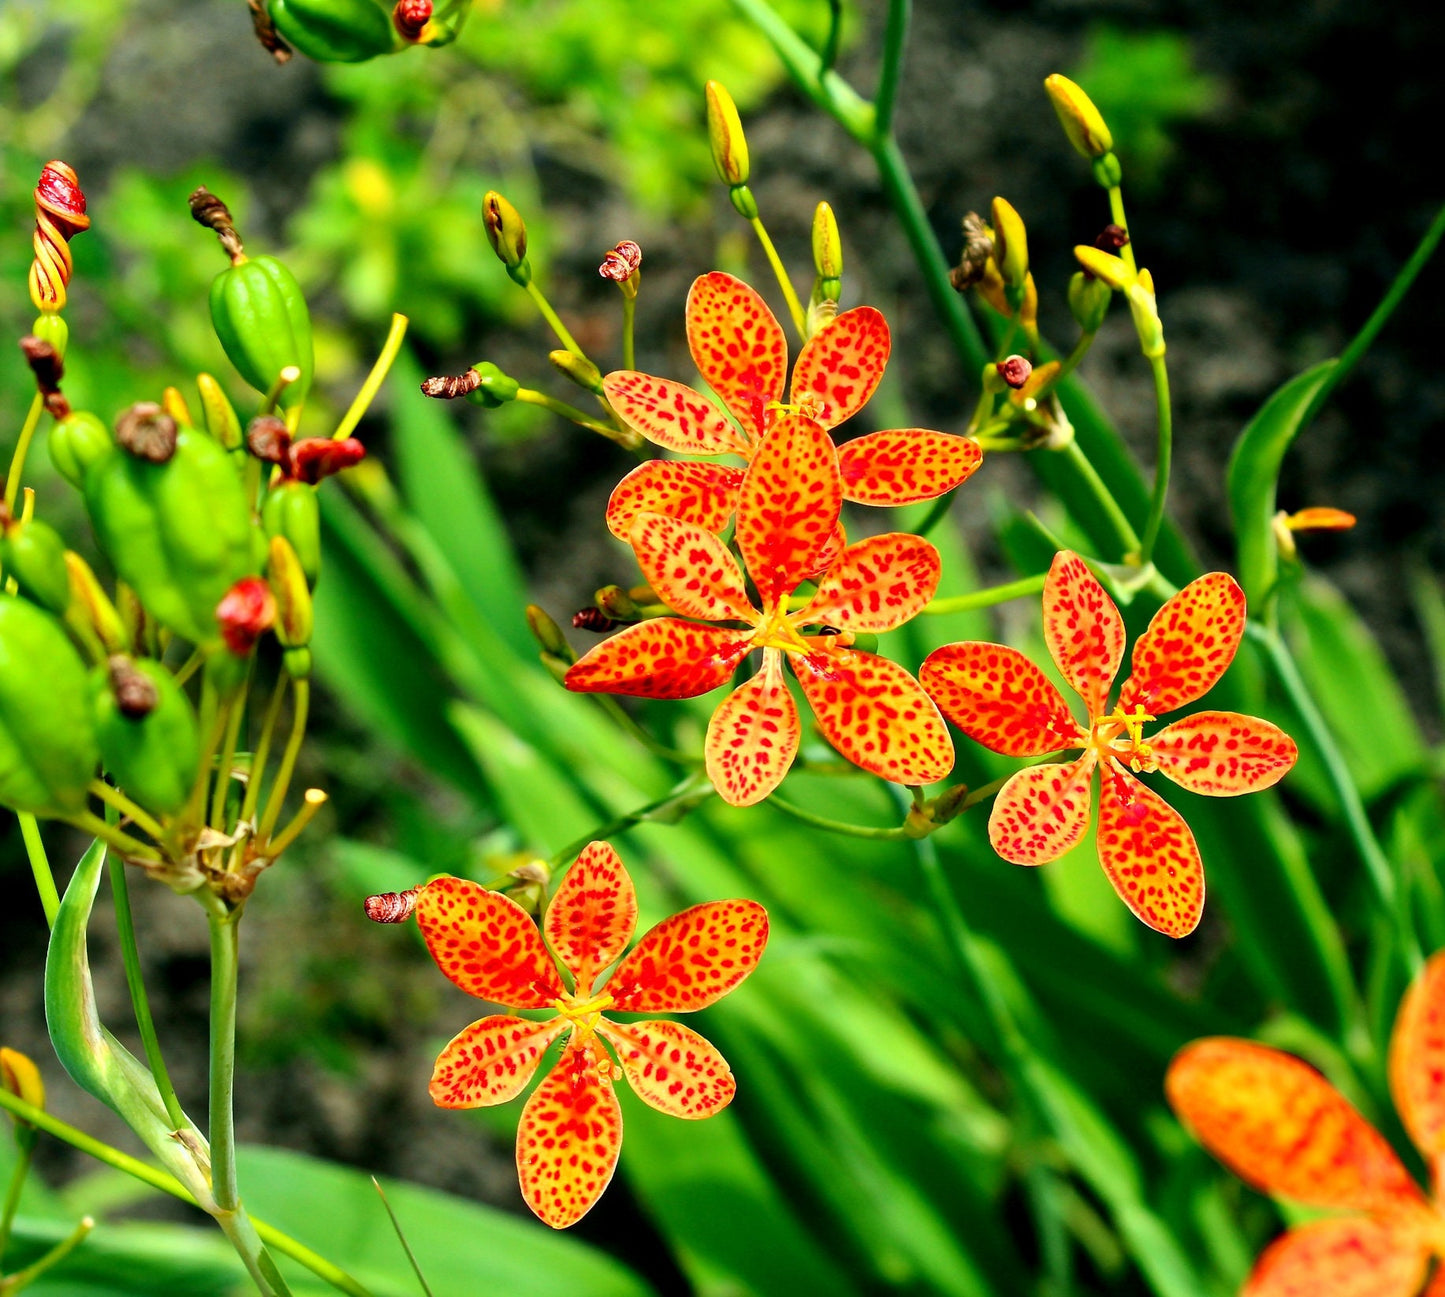 15 Leopard Lily Seeds for Planting - Belamcanda chinensis